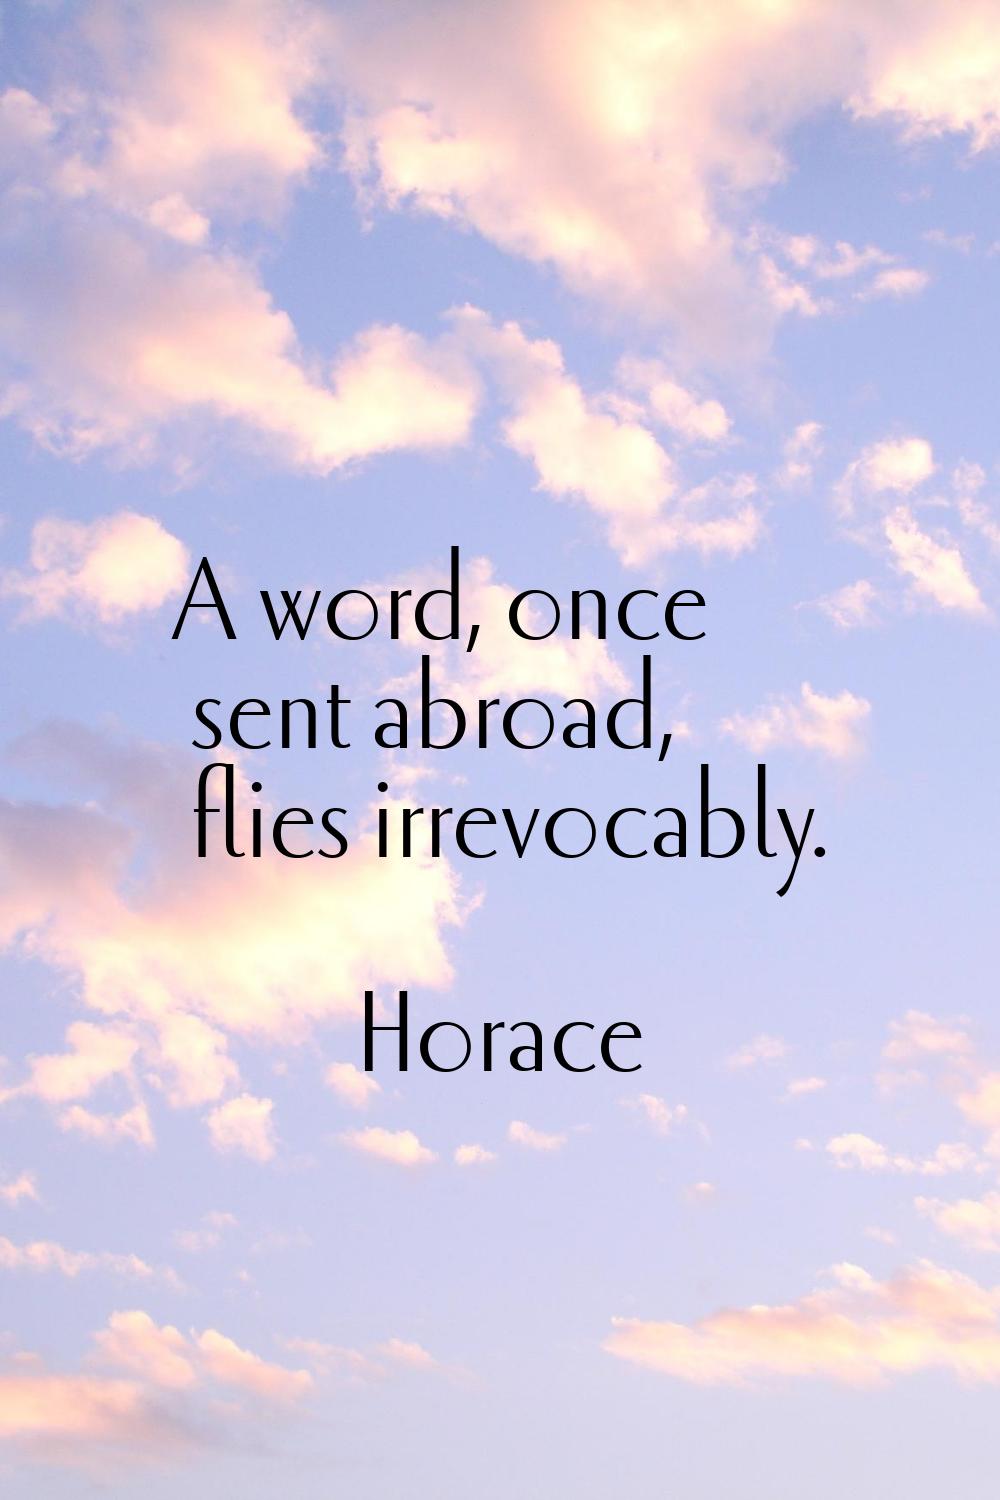 A word, once sent abroad, flies irrevocably.